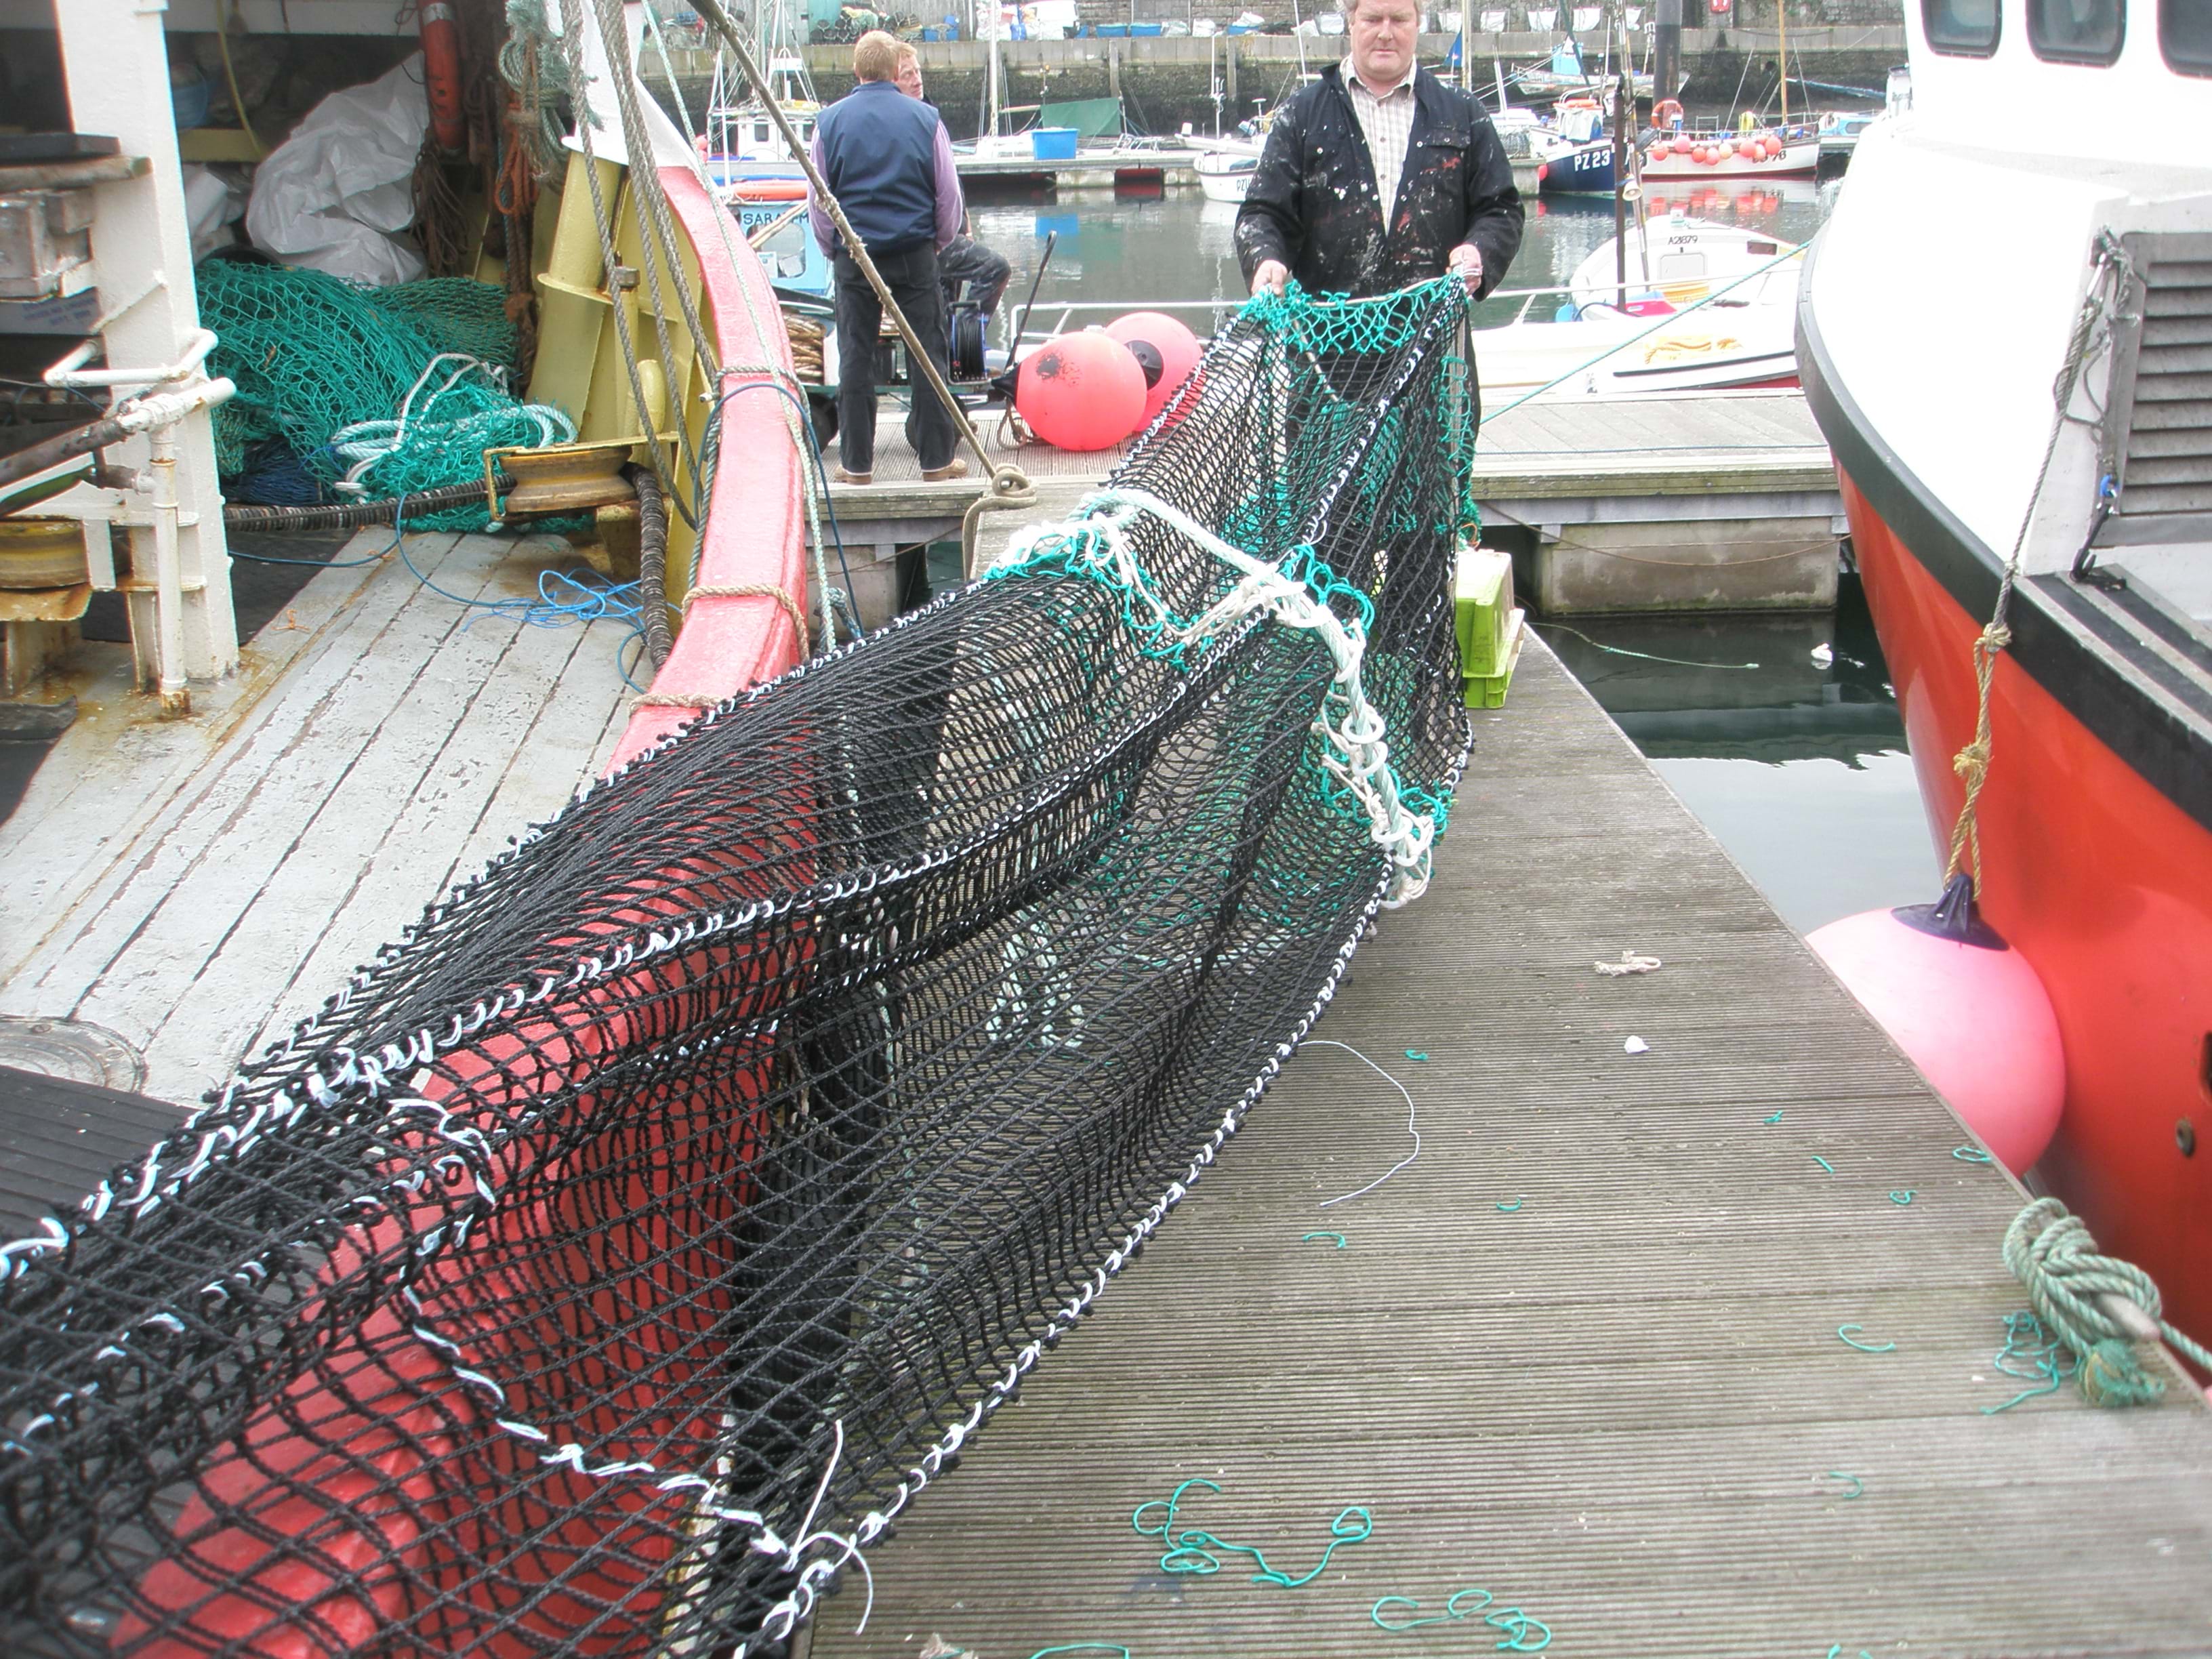 Fisherman pulling a 4 panel cod-end from the side of vessel at harbour